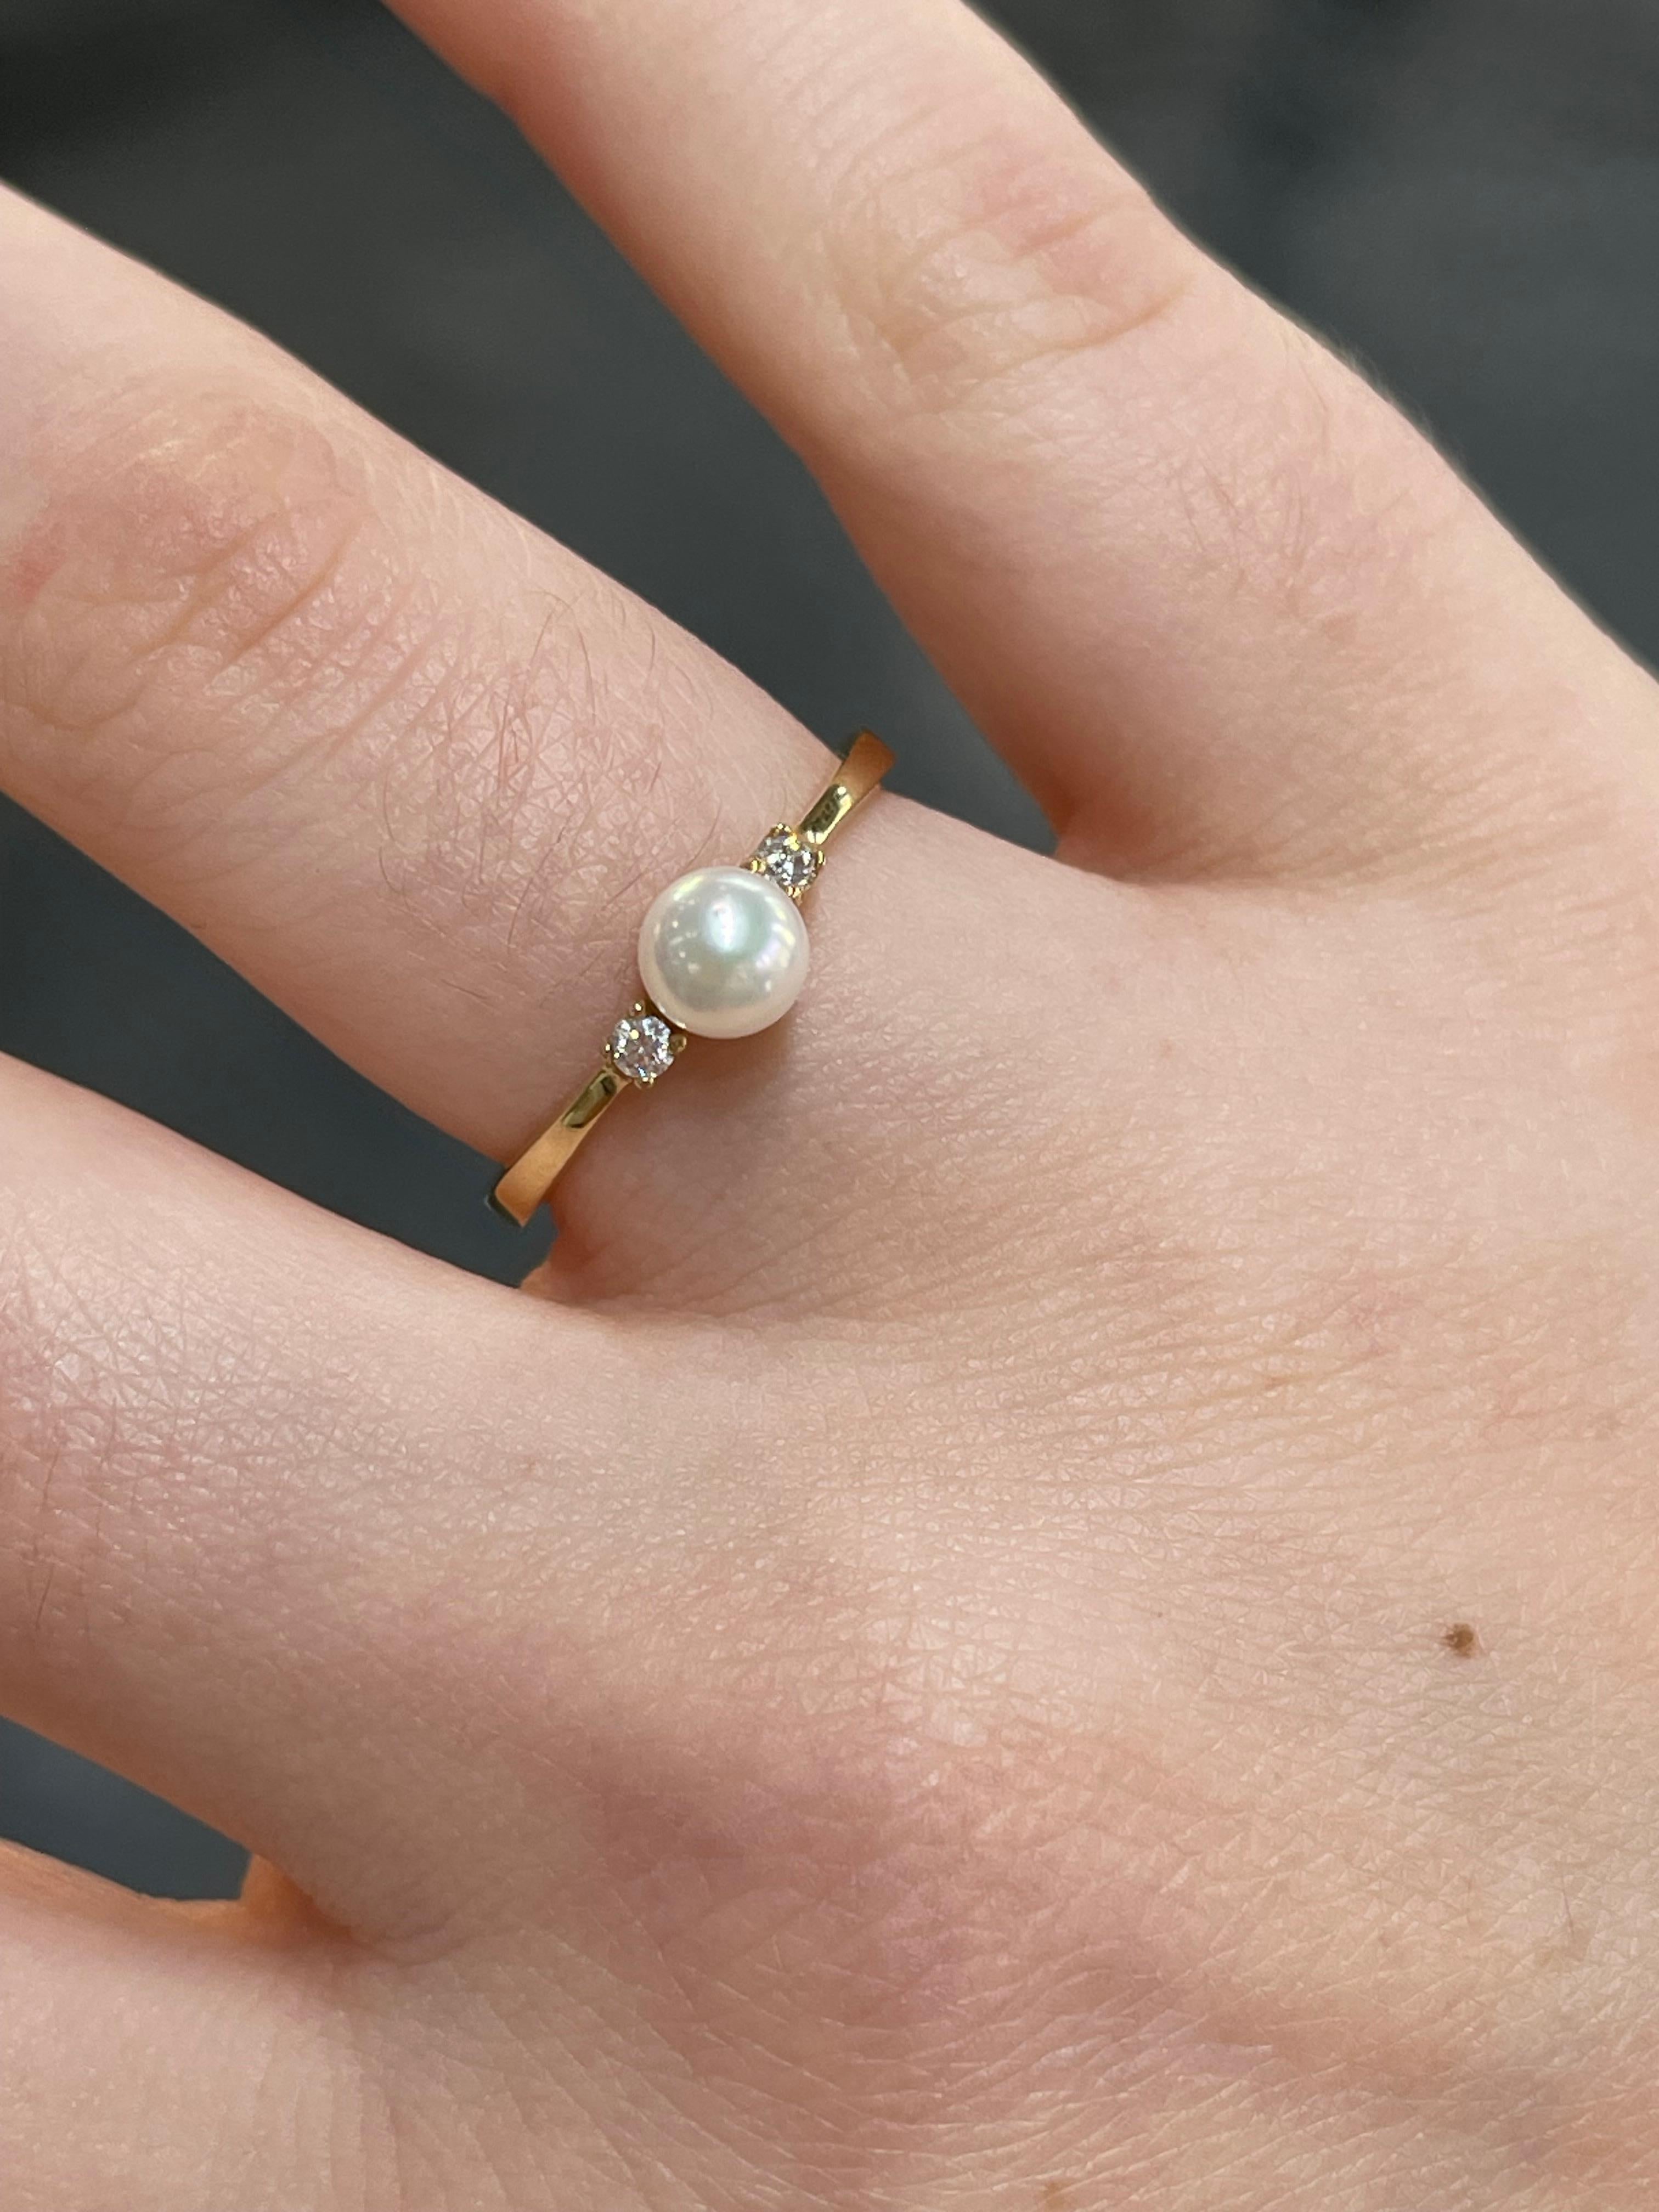 14K Yellow Gold White Pearl and Diamond Ring  In Excellent Condition For Sale In Stuart, FL